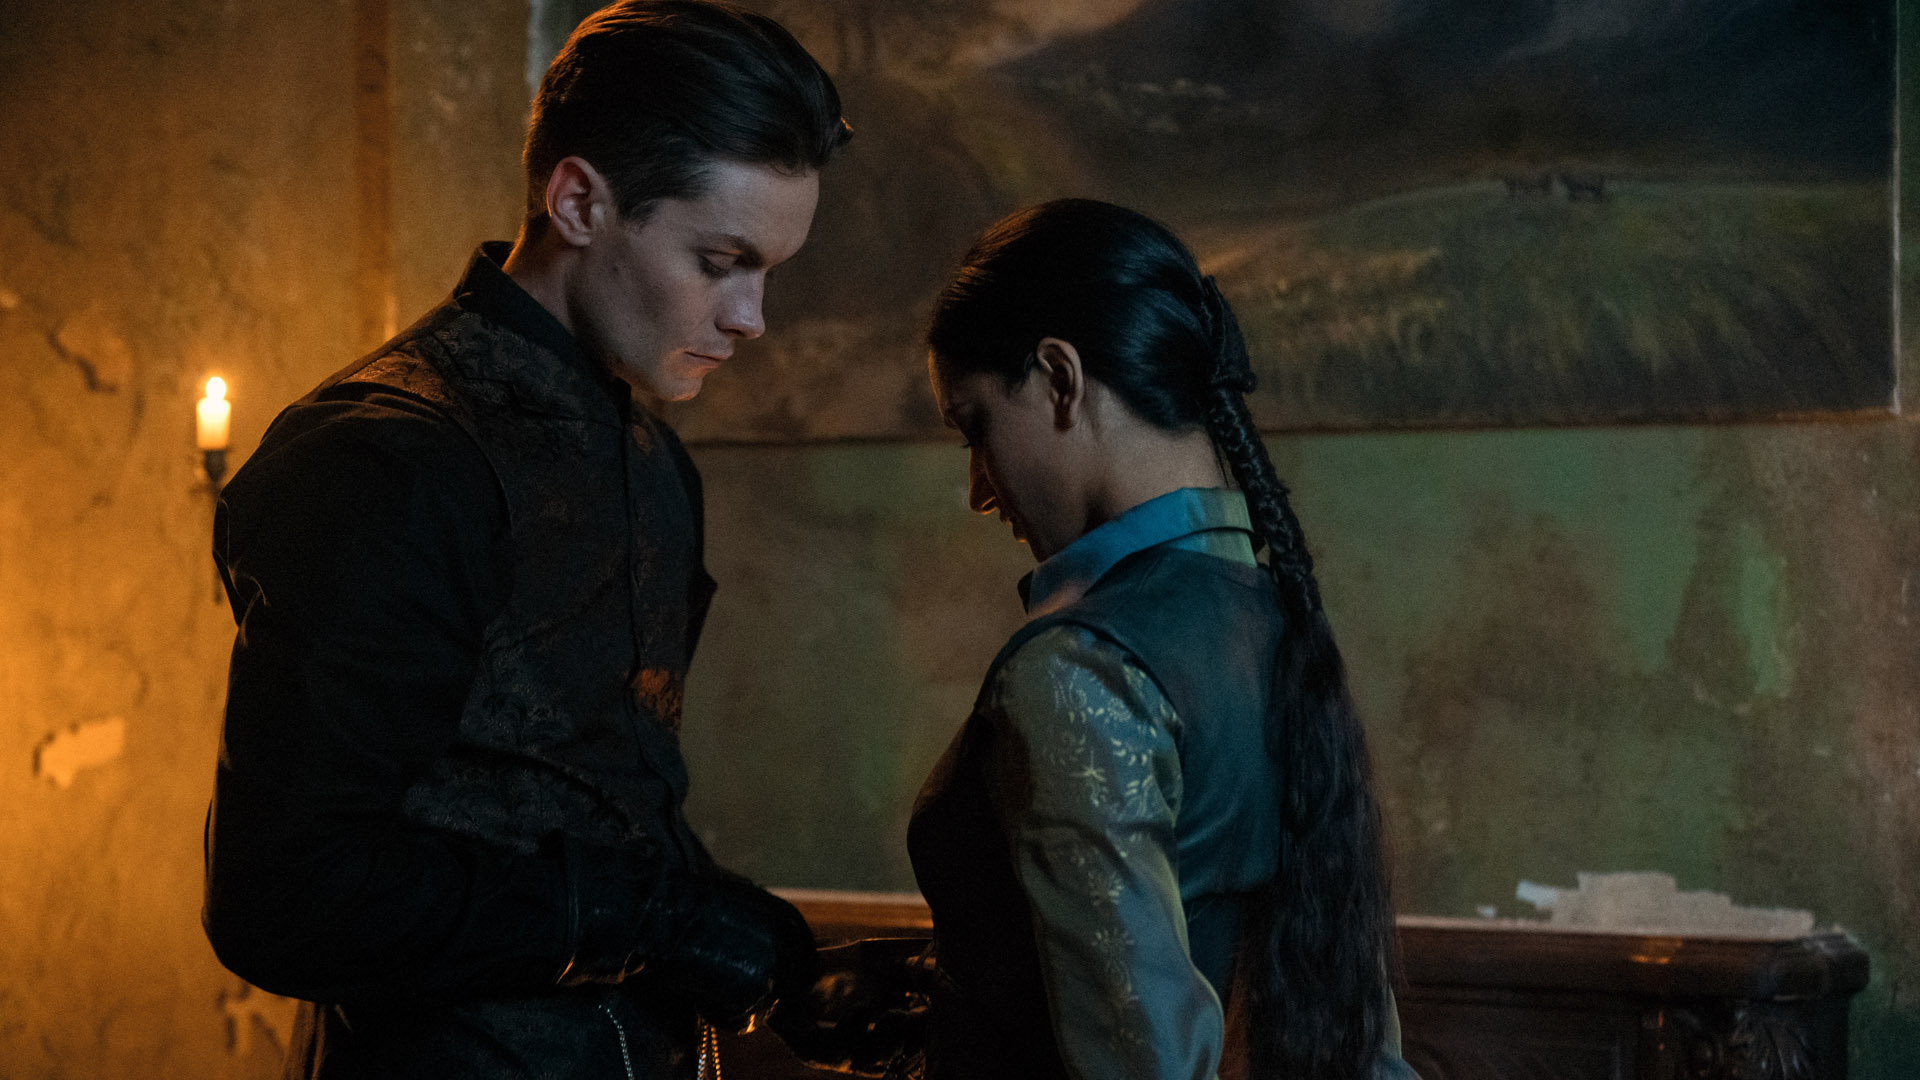 Kaz and Inej share a moment in a dimly lit room in Shadow and Bone season 2